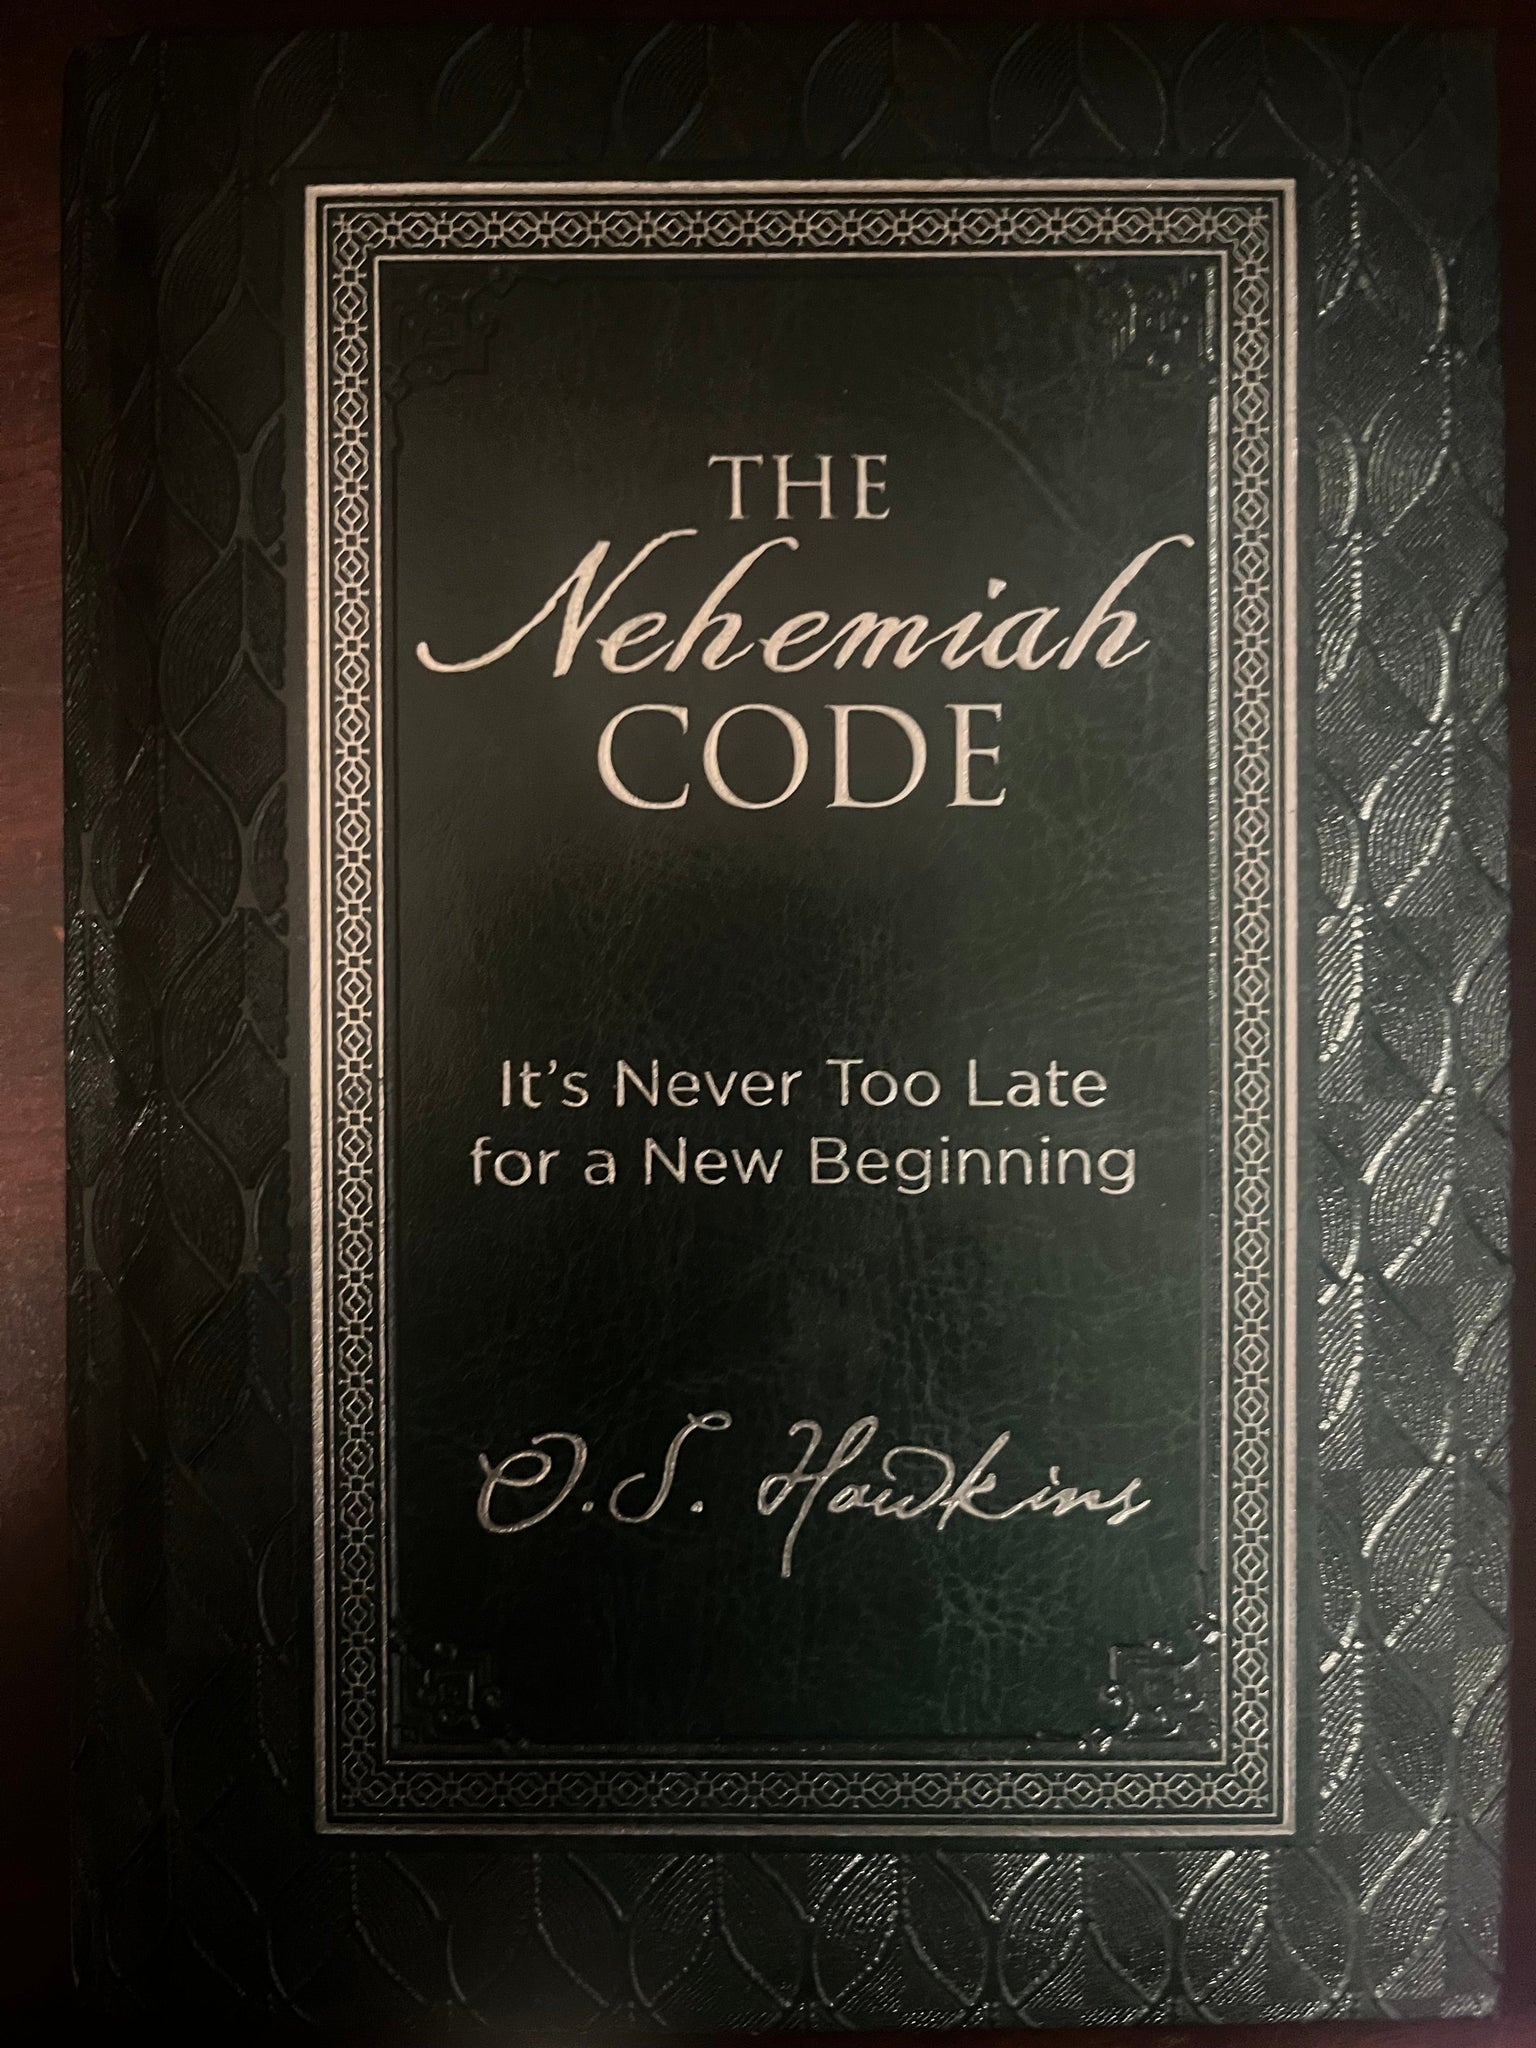 The Nehemiah Code: It's Never Too Late for a New Beginning